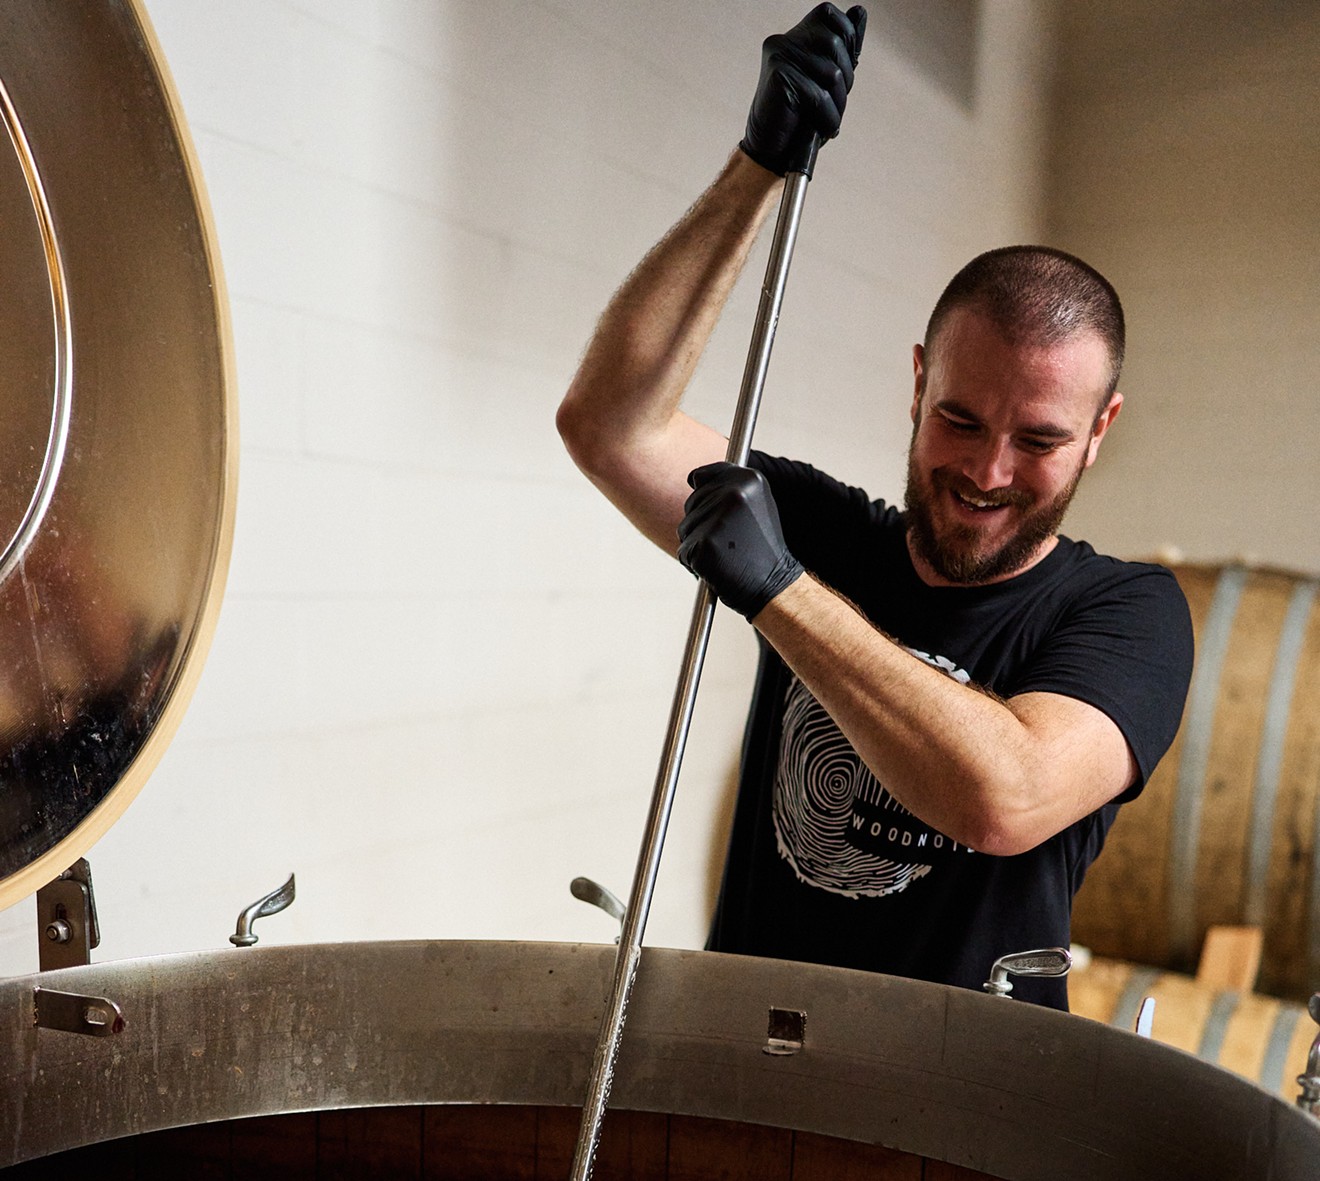 Arizona Wilderness Brewing Co. Wood Notes Cellar Manager Nick Pauley crushes grapes for a wine-beer hybrid the brewery makes for Terroir Festival.